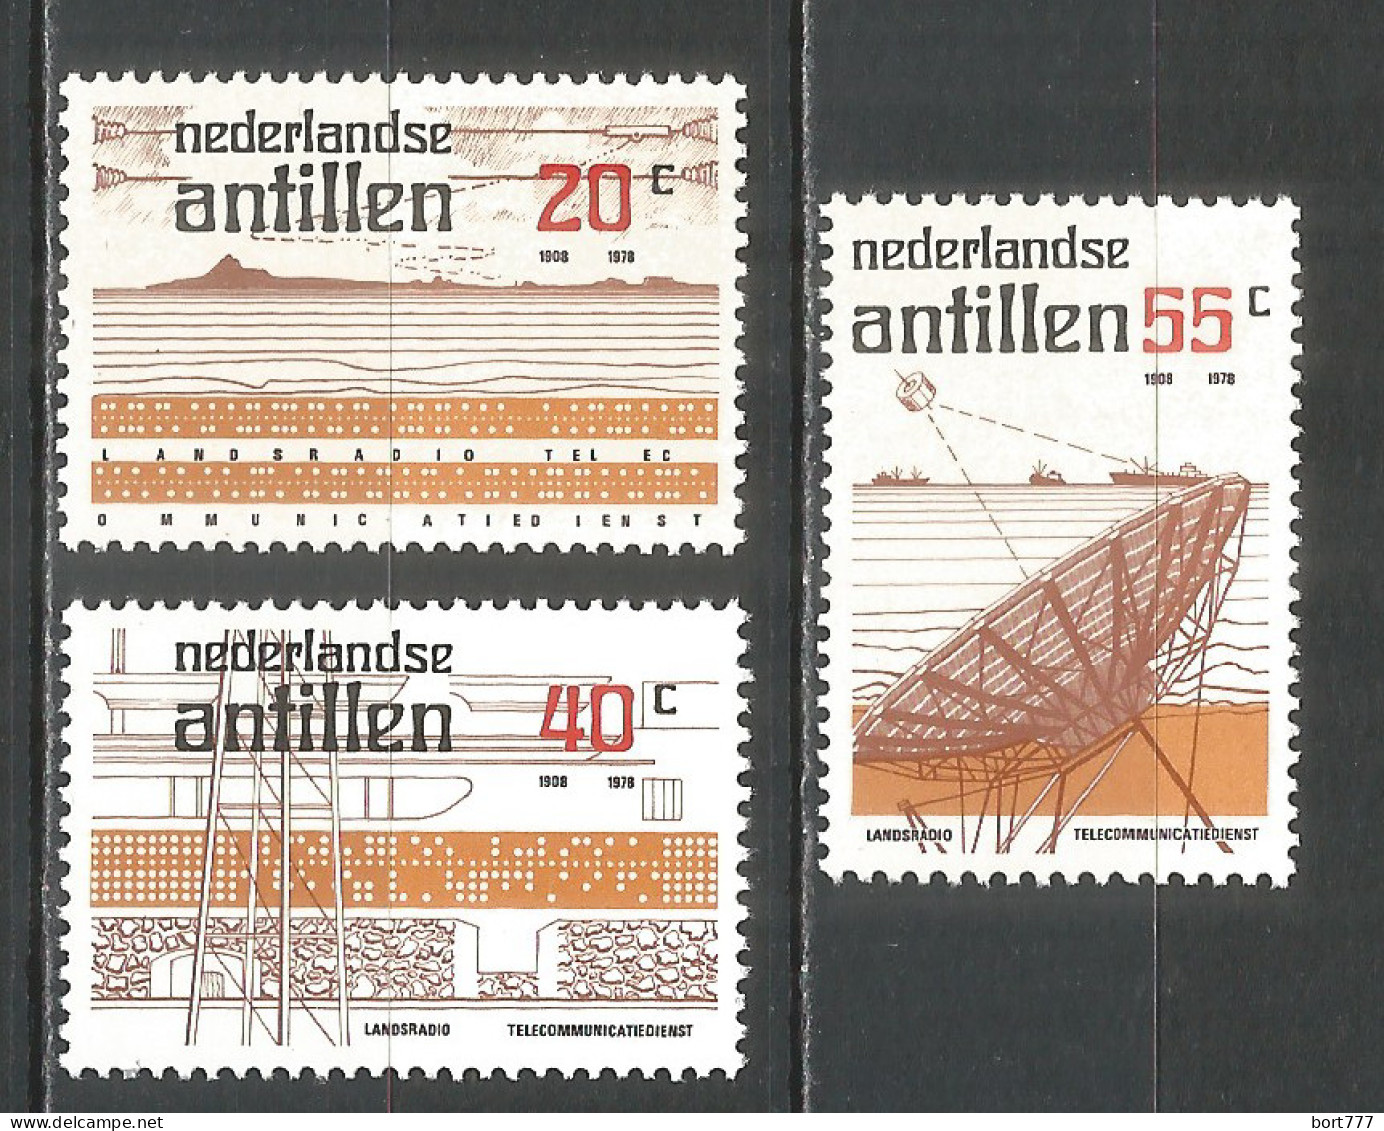 Netherlands Antilles 1978 Year , Mint Stamps MNH (**)  Michel# 371-373 - Curacao, Netherlands Antilles, Aruba